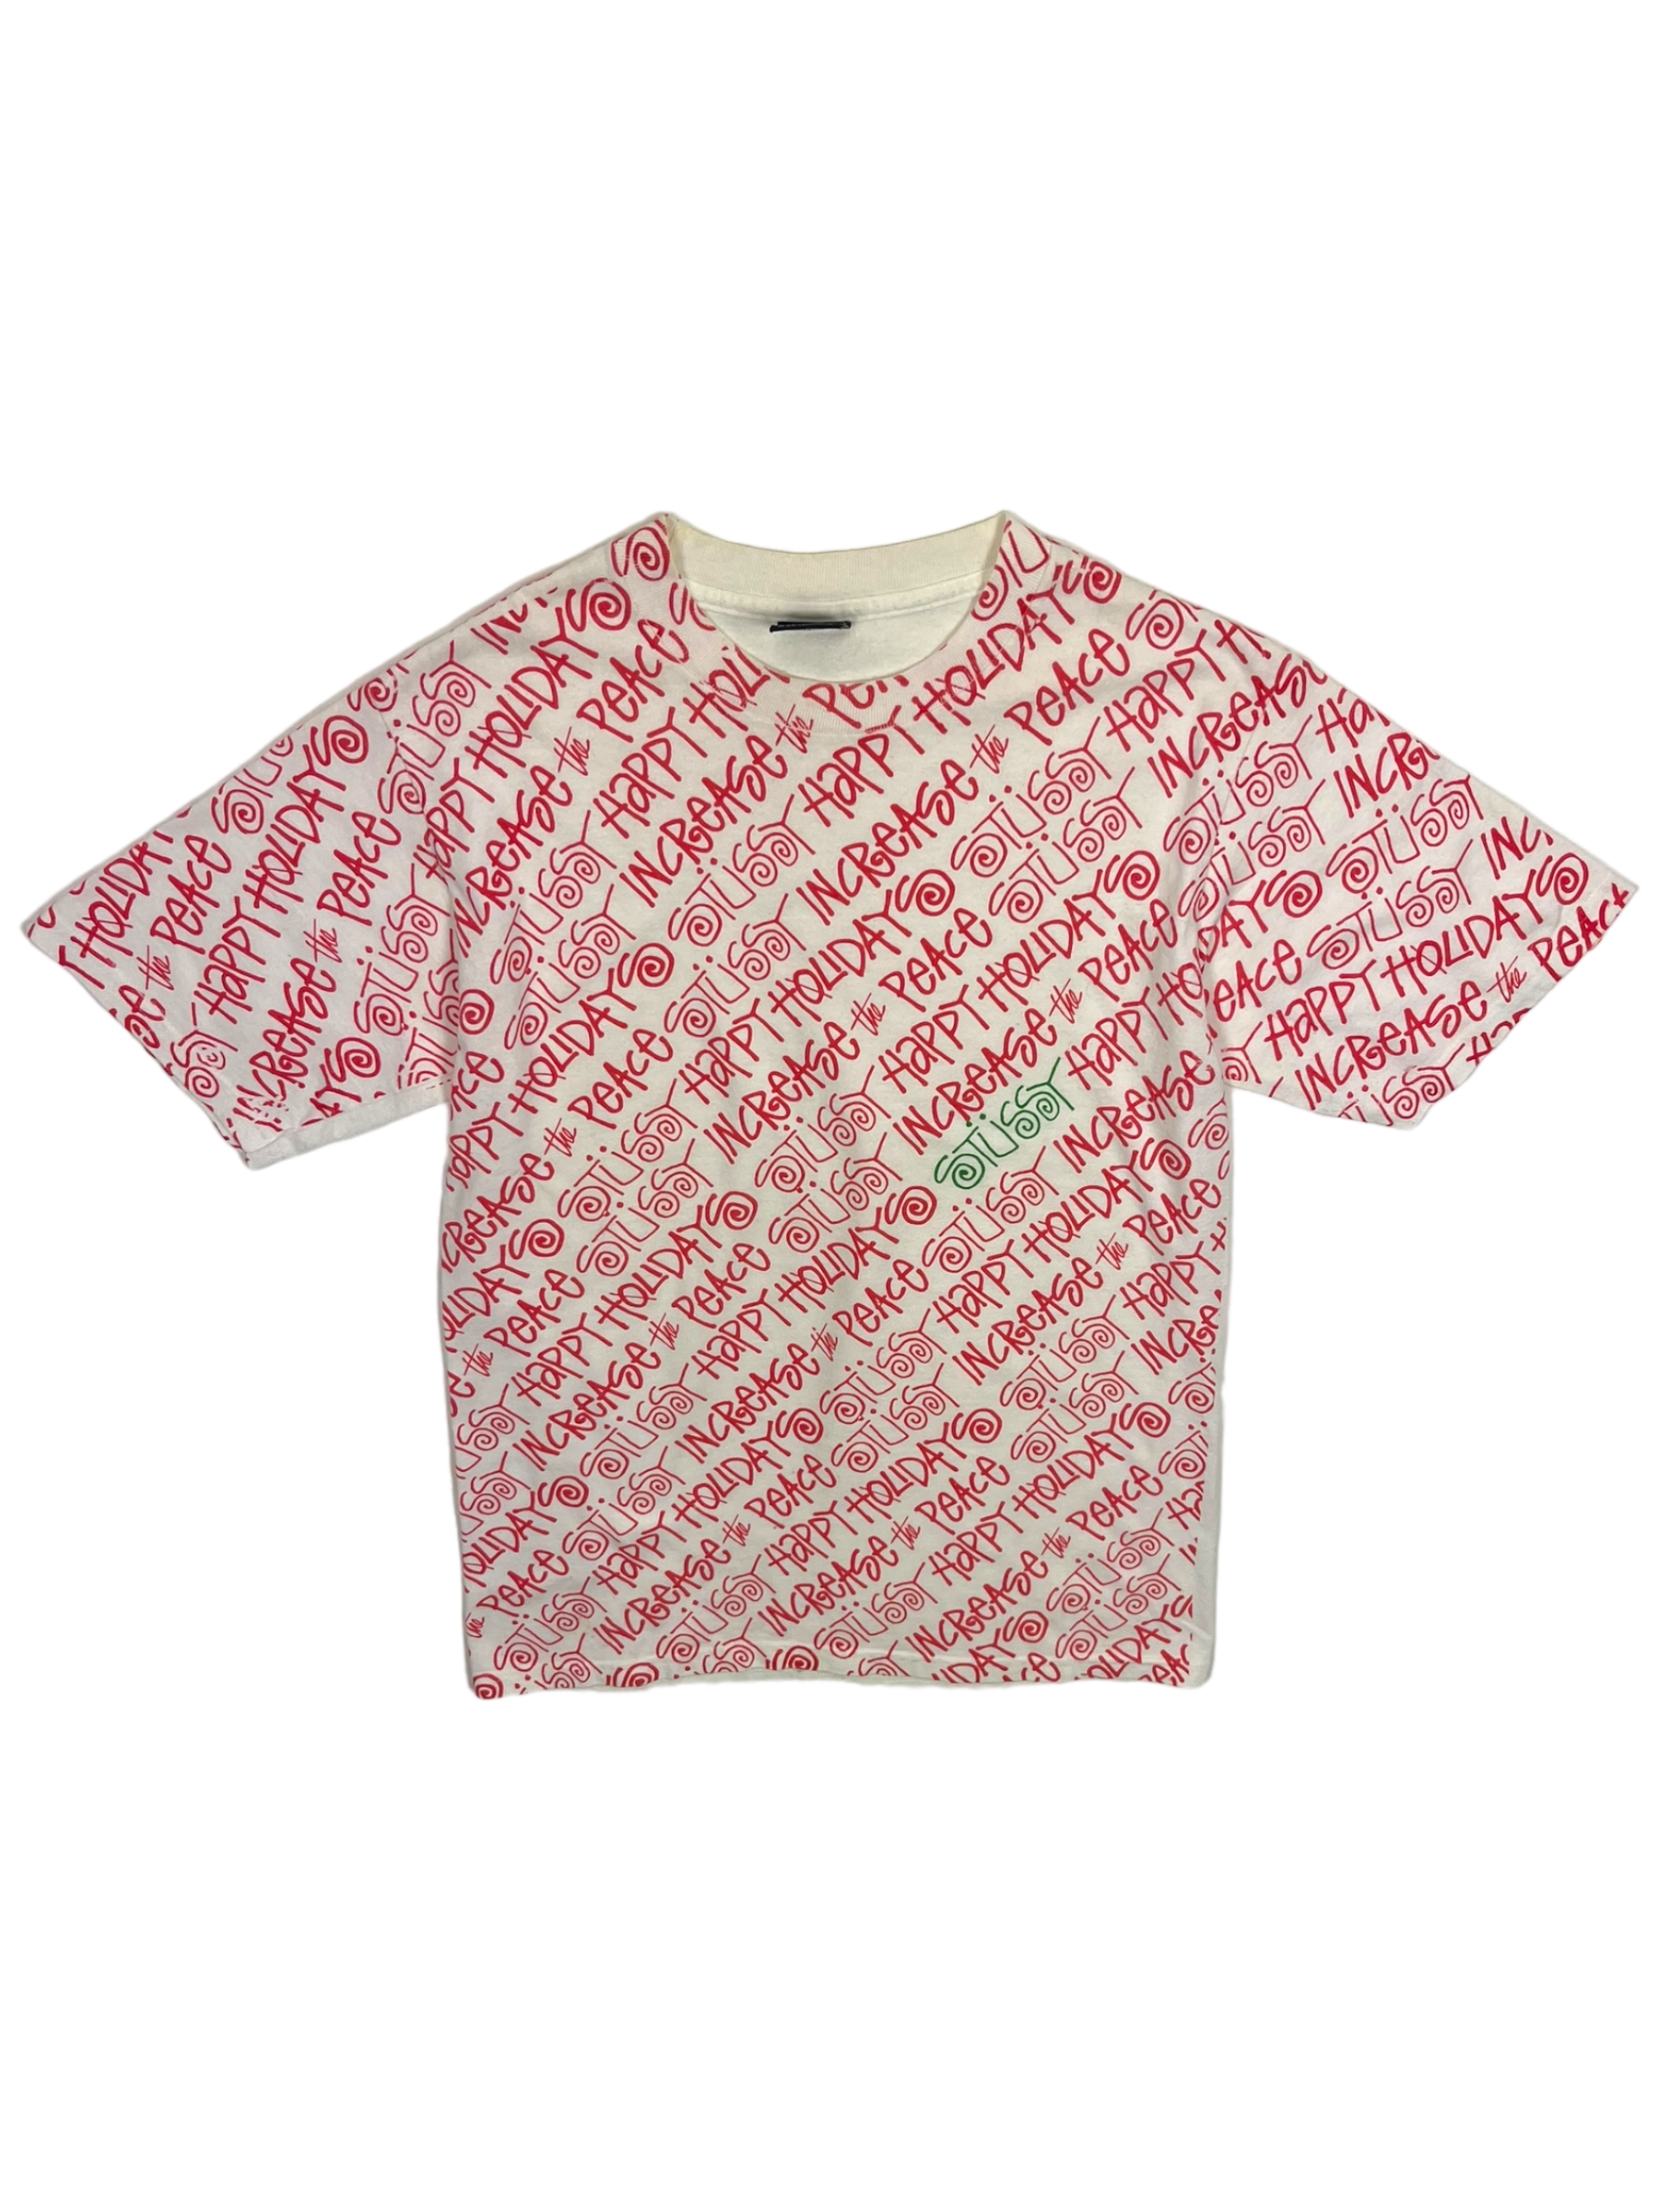 Stüssy Vintage Red White Holliday Tee